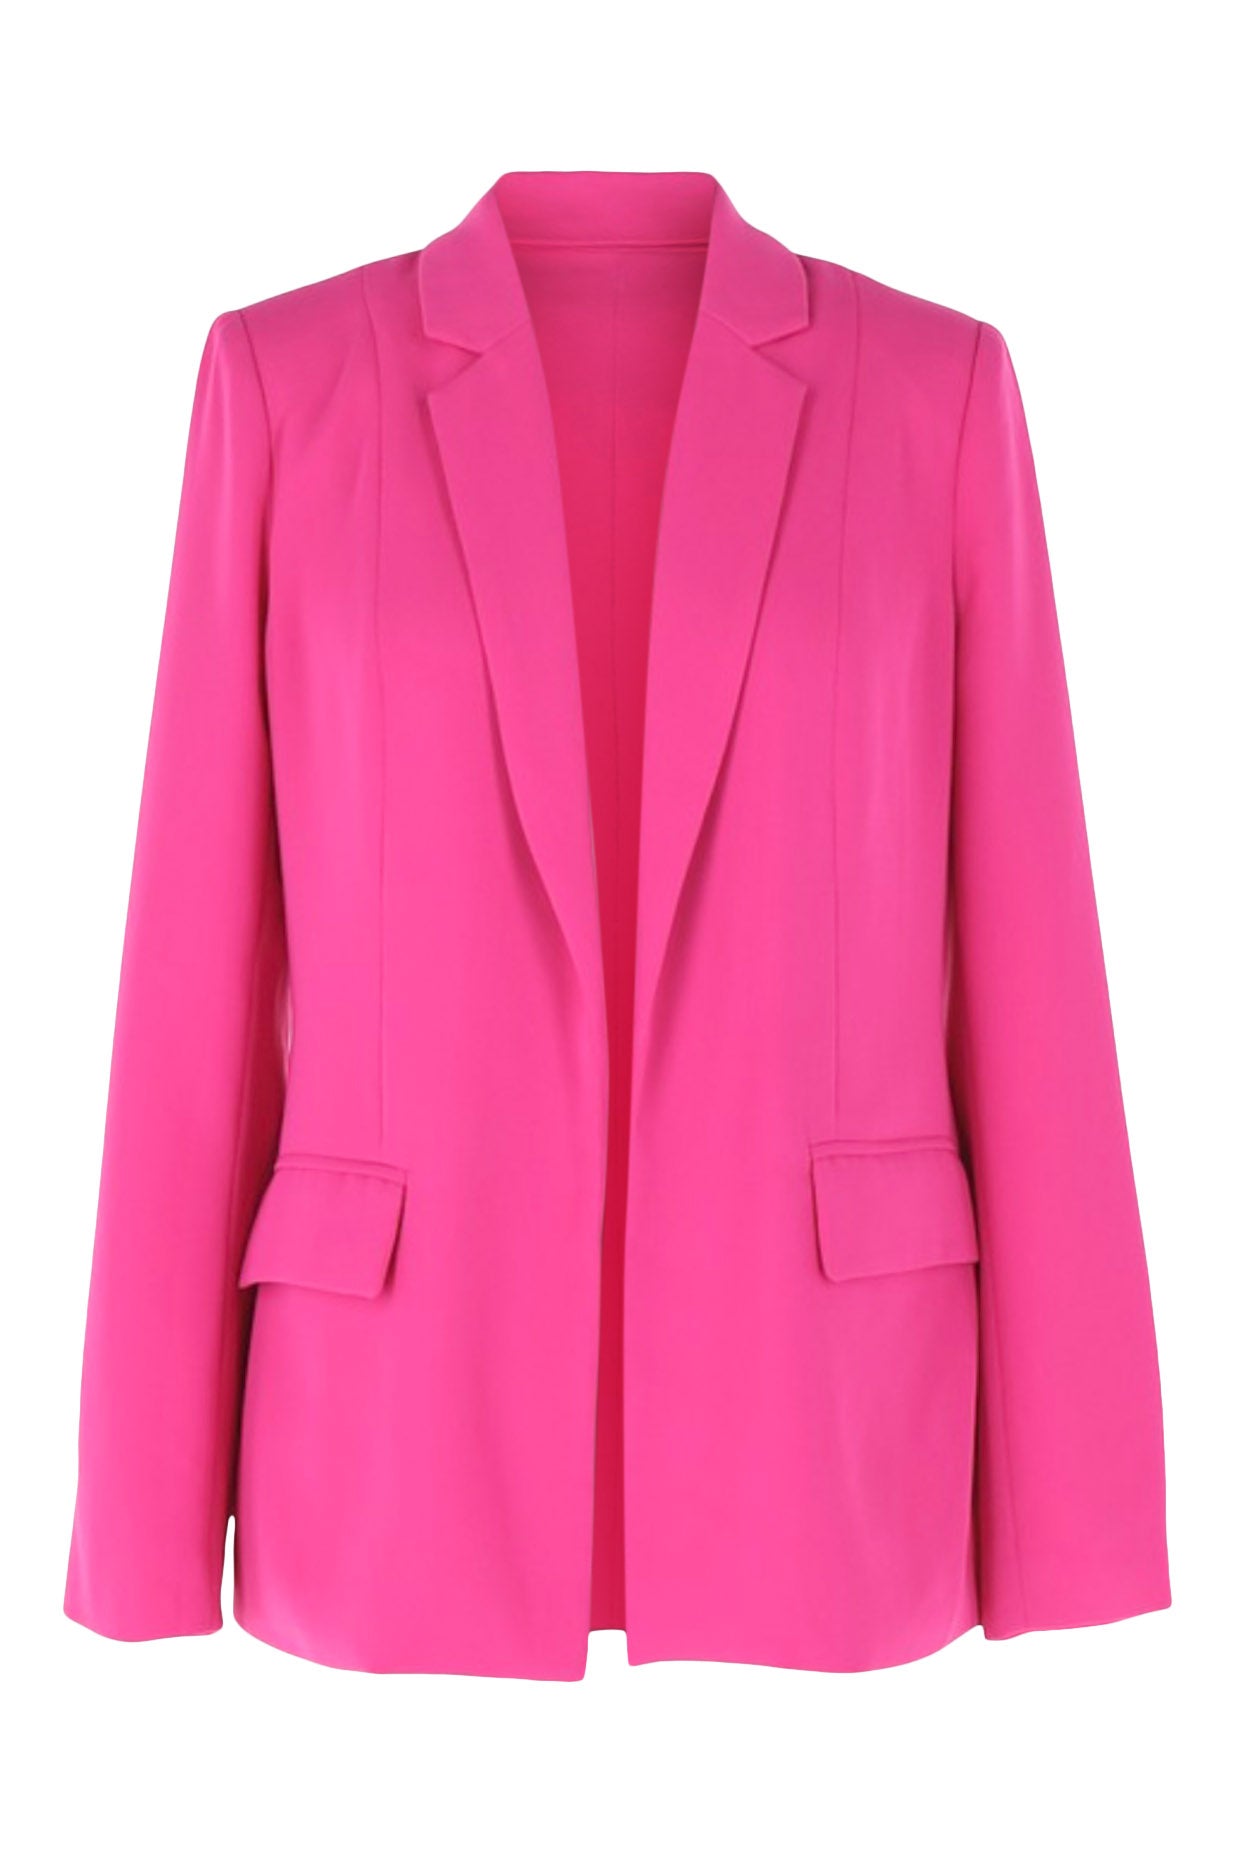 Hedley Hot Pink Blazer | The Lace Cactus